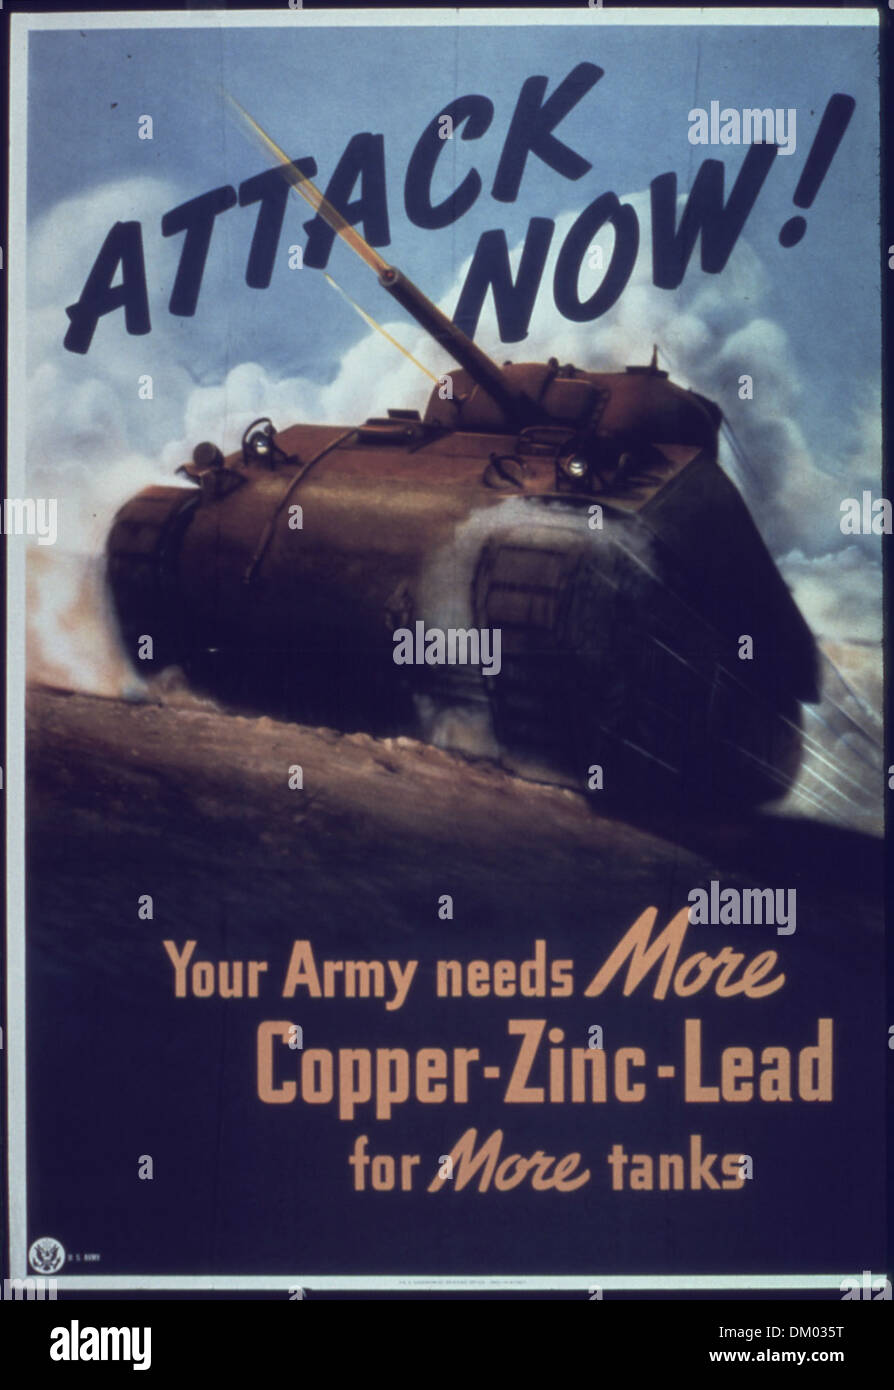 'Attack now - Your army needs more copper - Zinc - Lead for more tanks' 513889 Stock Photo